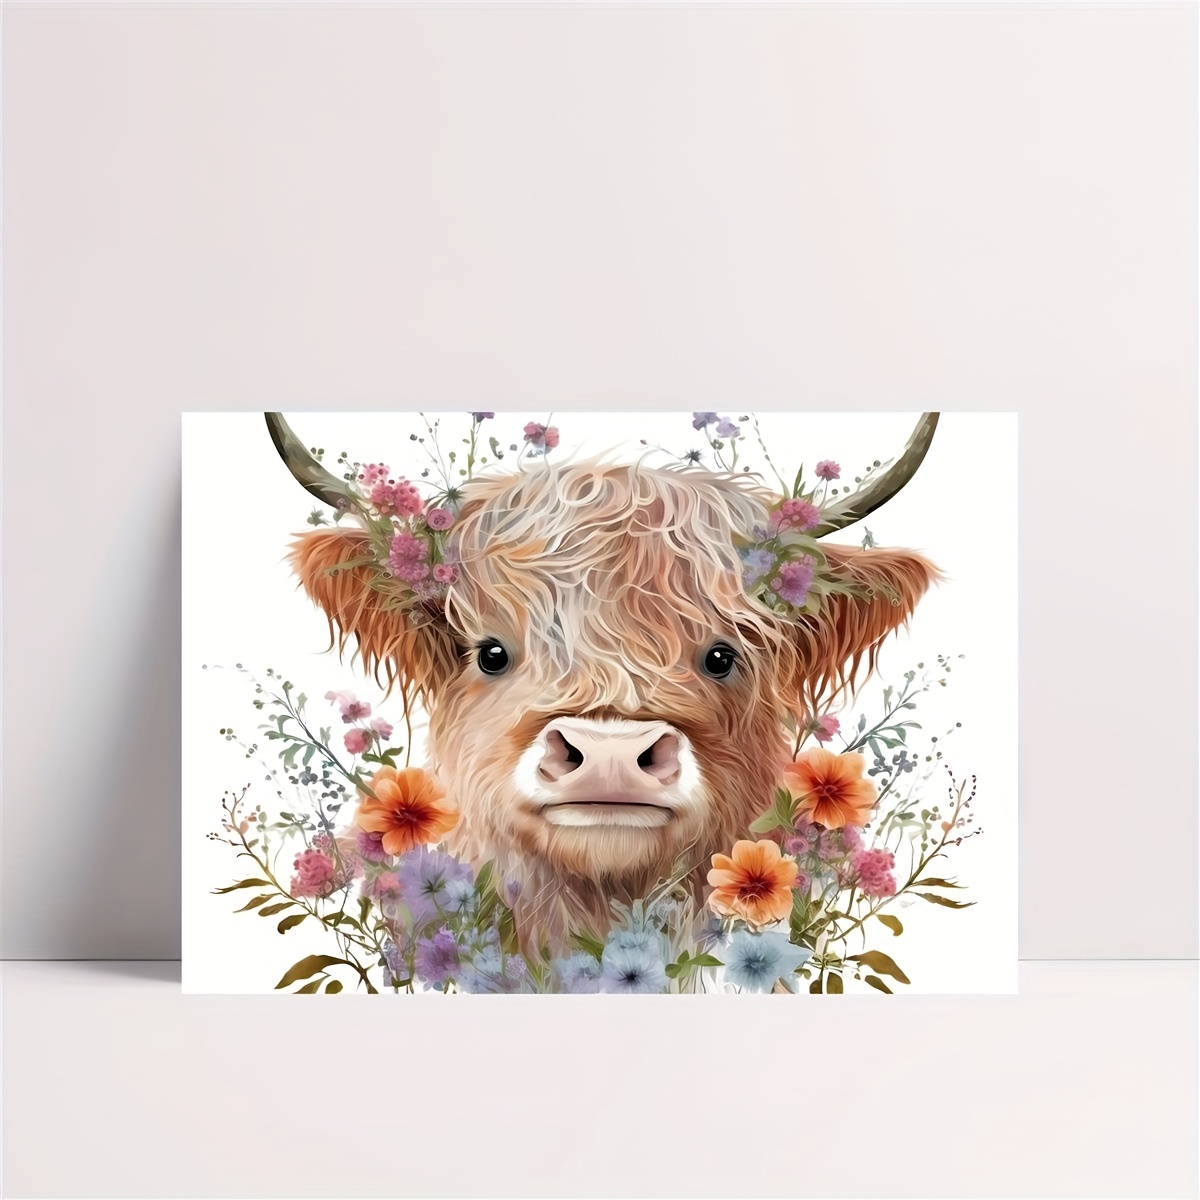 Baby Highland Cow - The Crown Prints